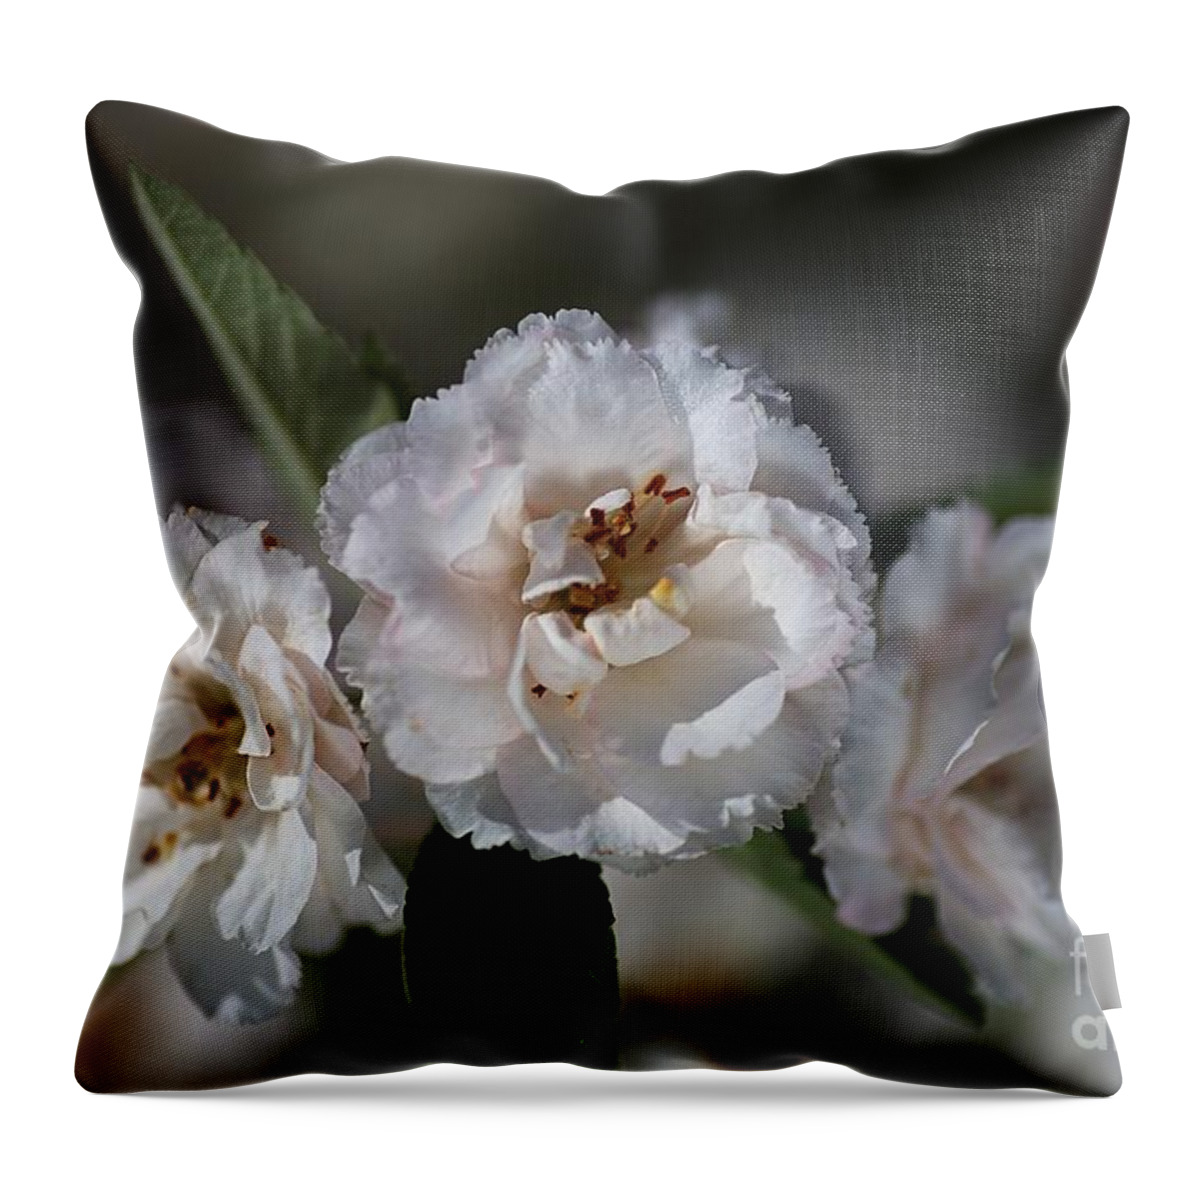 Crabapple Throw Pillow featuring the photograph Soft White Crabapple Flowers by Joy Watson